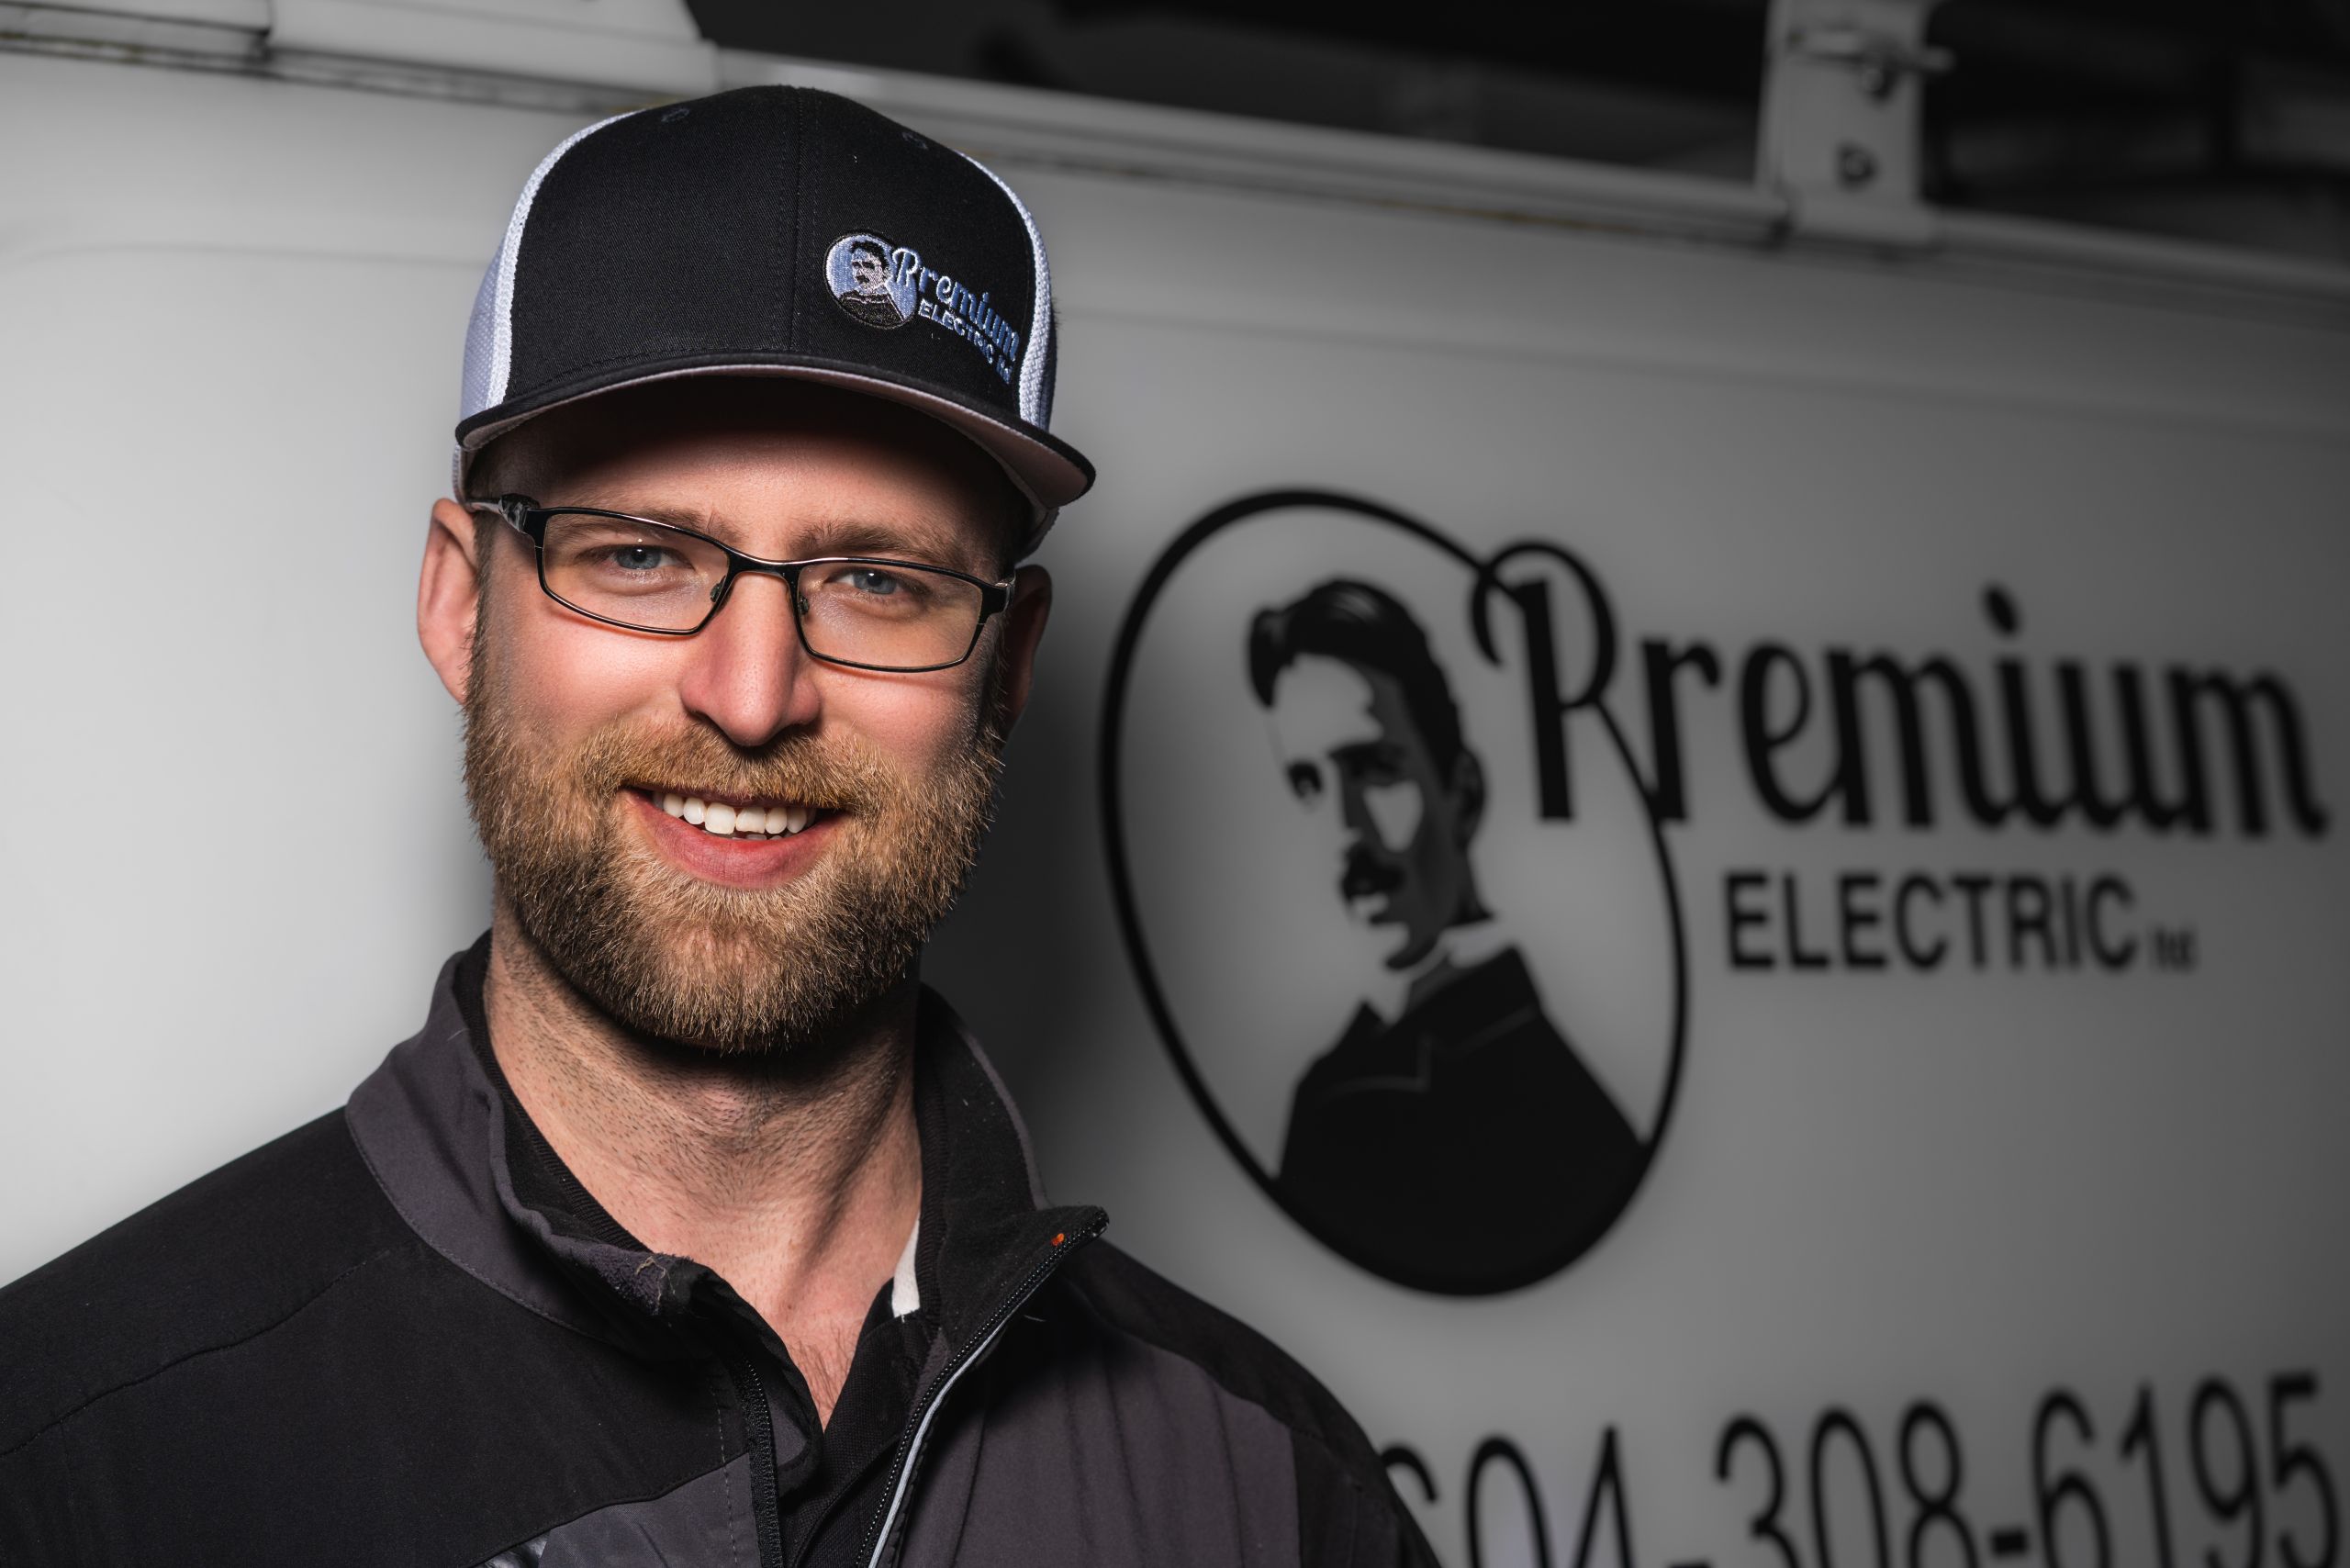 Headshot of Vince Karson from Premium Electric, Abbotsford